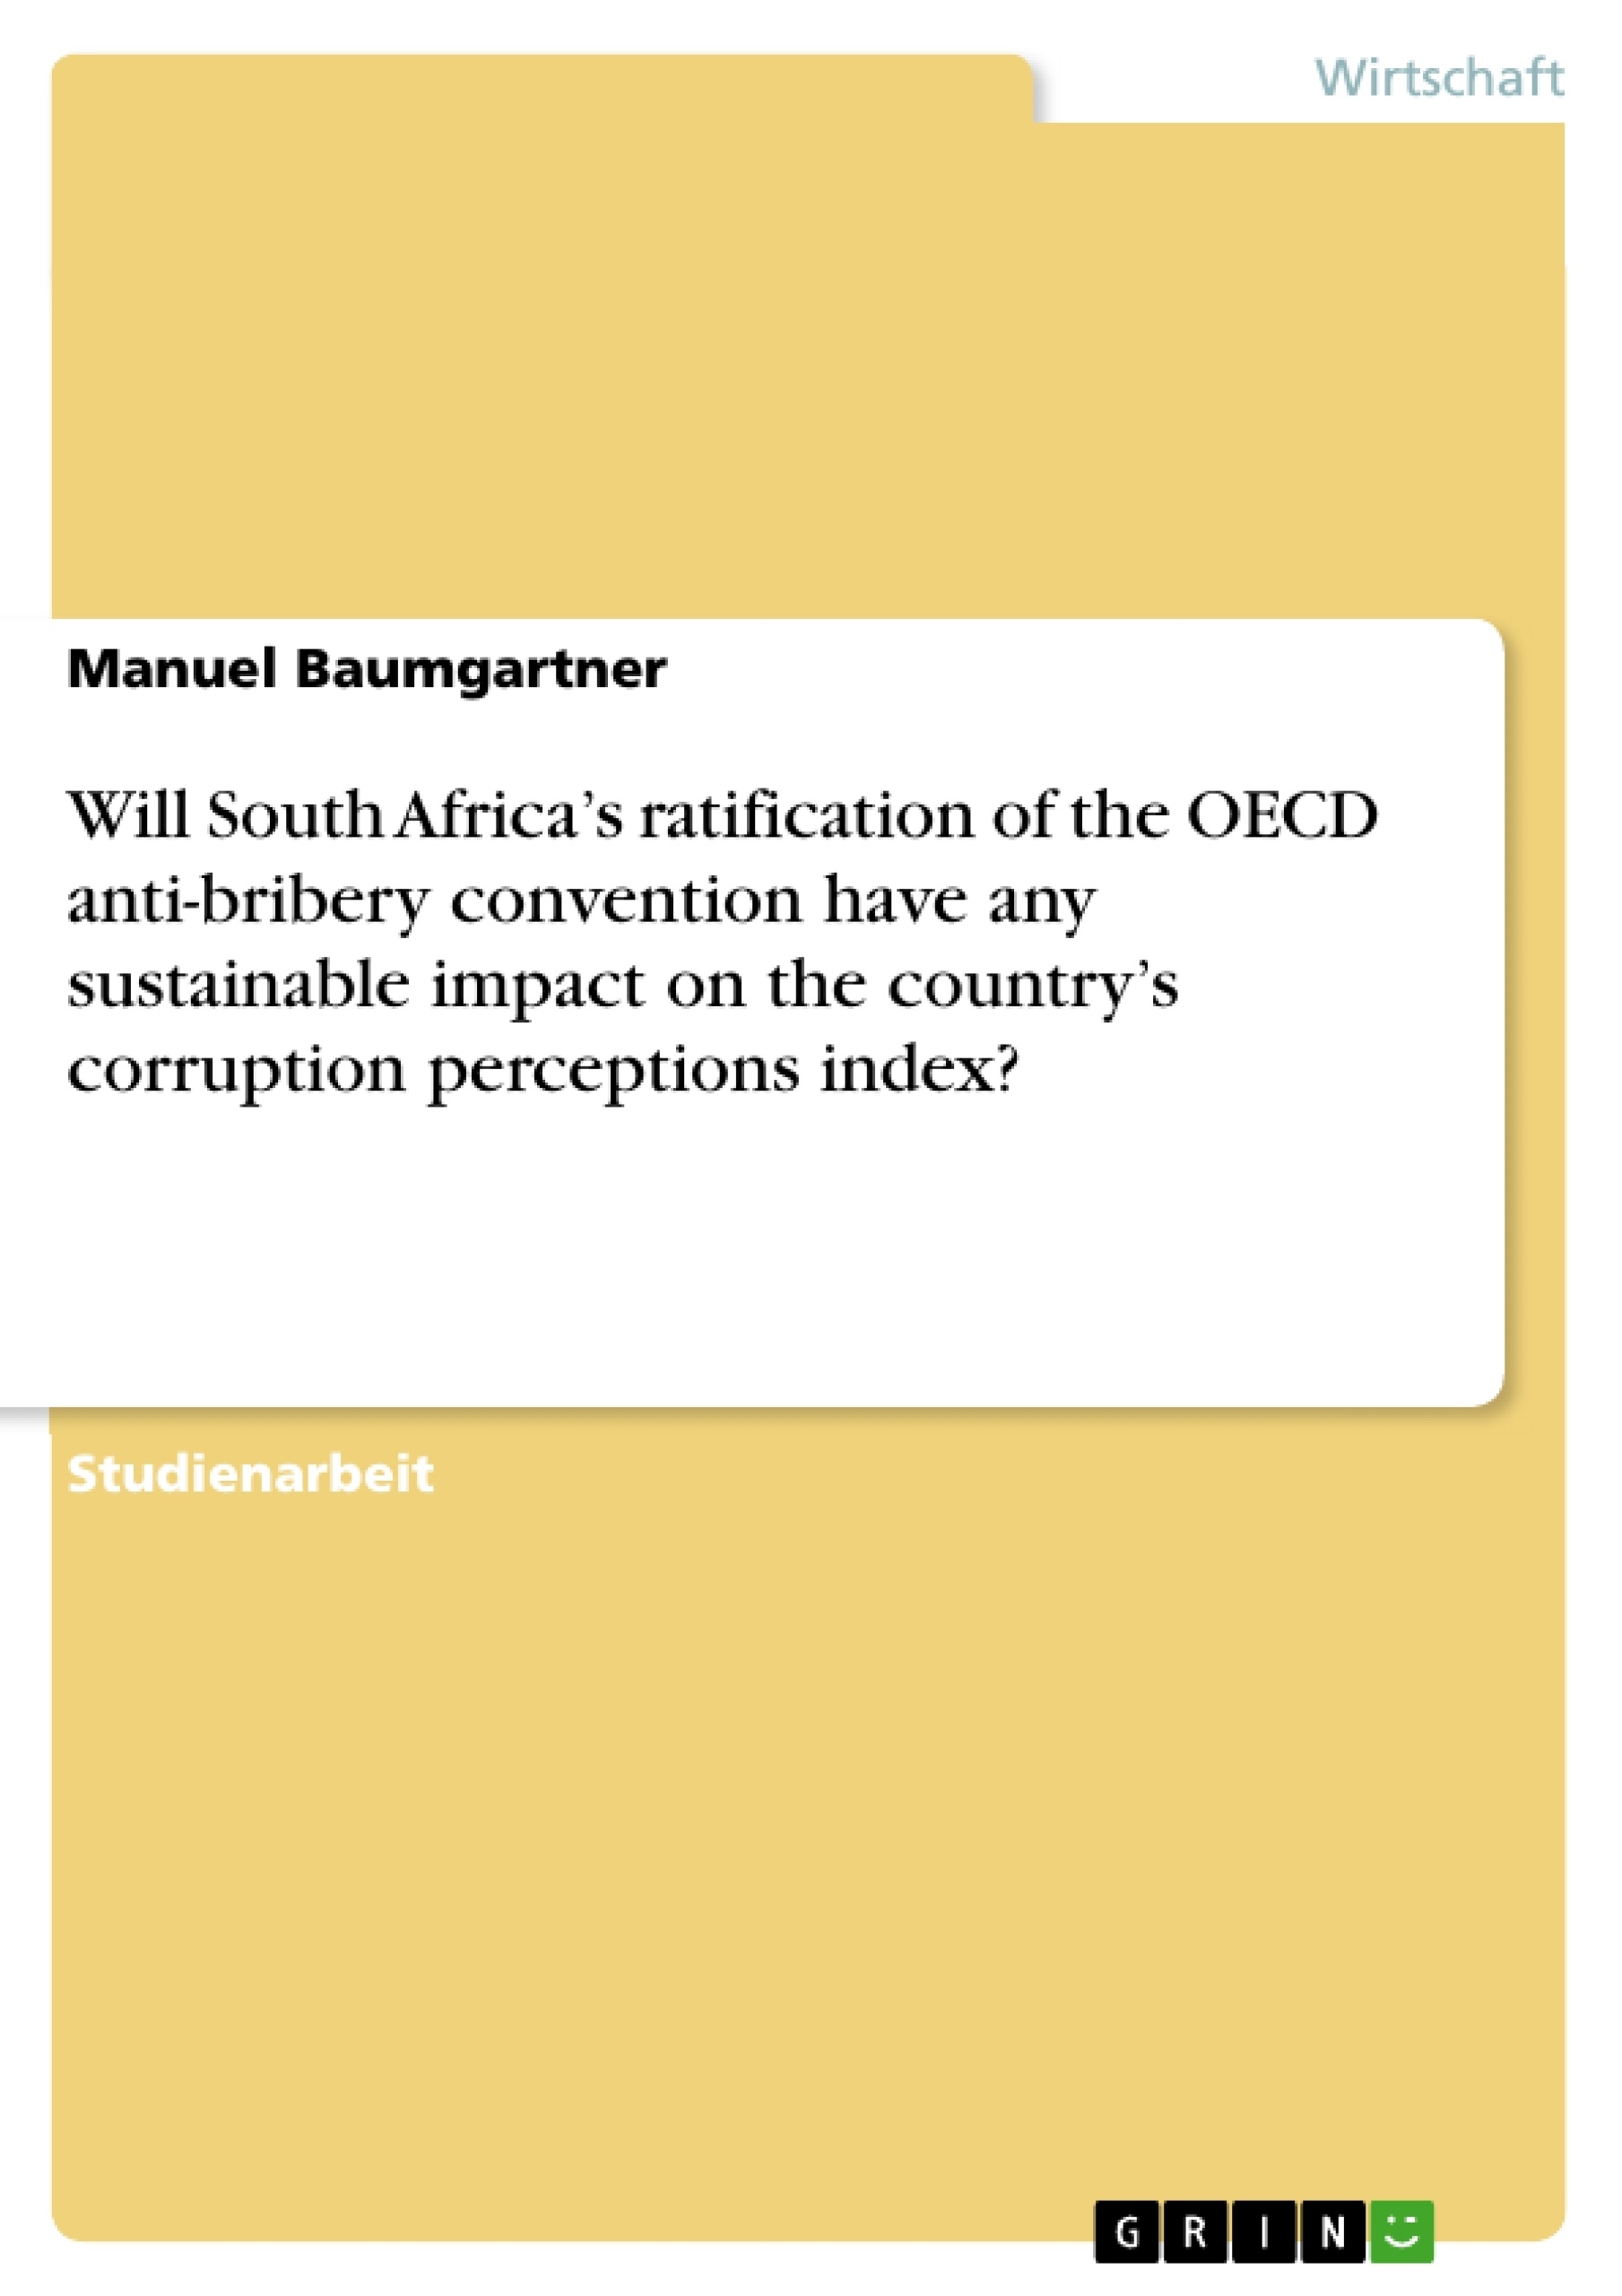 Titre: Will South Africa’s ratification of the OECD anti-bribery convention have any sustainable impact on the country’s corruption perceptions index?